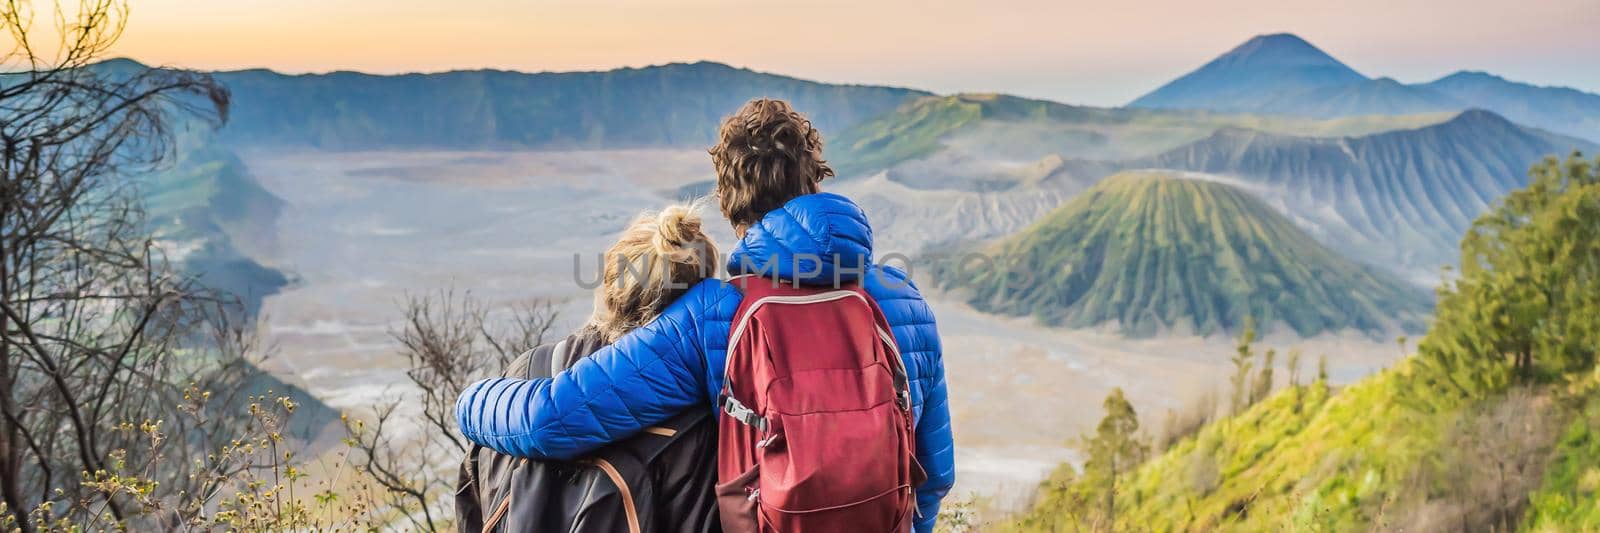 BANNER, LONG FORMAT Young couple man and woman meet the sunrise at the Bromo Tengger Semeru National Park on the Java Island, Indonesia. They enjoy magnificent view on the Bromo or Gunung Bromo on Indonesian, Semeru and other volcanoes located inside of the Sea of Sand within the Tengger Caldera. One of the most famous volcanic objects in the world. Travel to Indonesia concept.